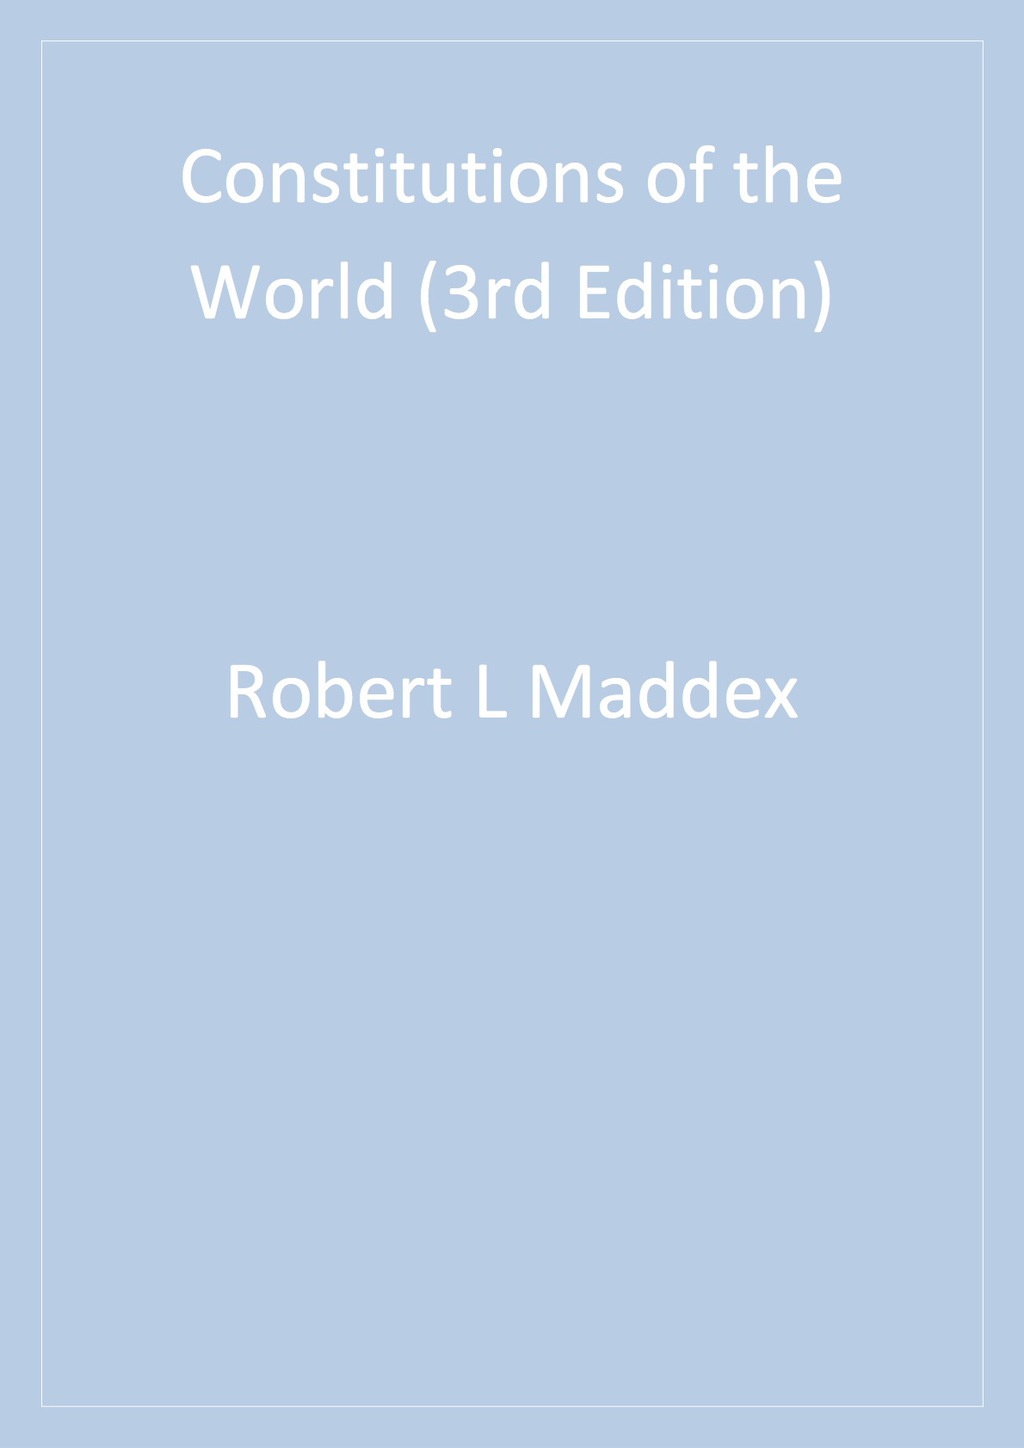 Constitutions of the World - 3rd Edition (eBook)